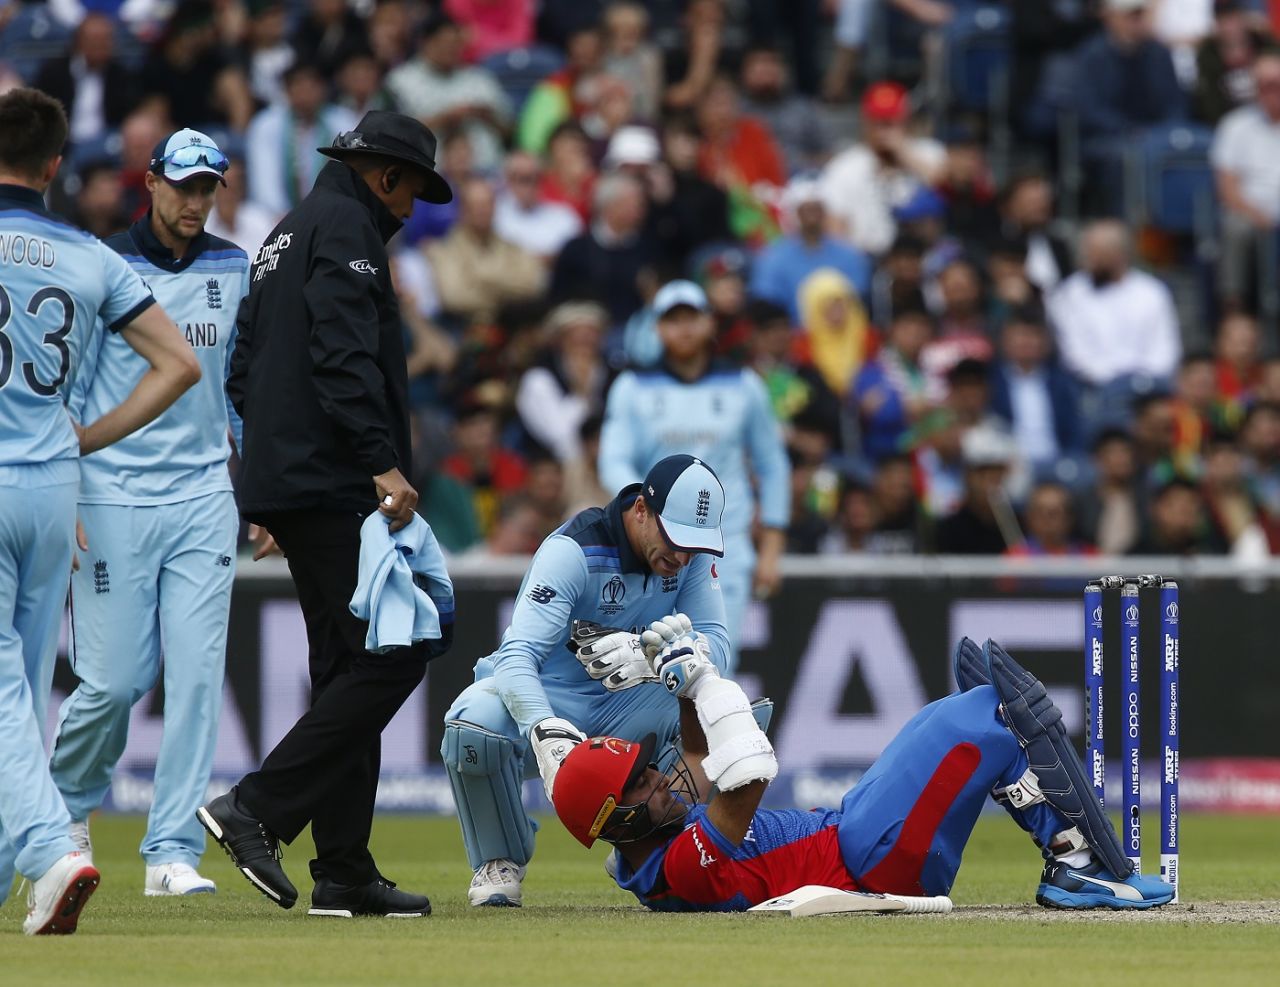 Jos Buttler checks on Hashmatullah Shahidi after he is struck by a Mark Wood bouncer, England v Afghanistan, World Cup 2019, Manchester, June 18, 2019